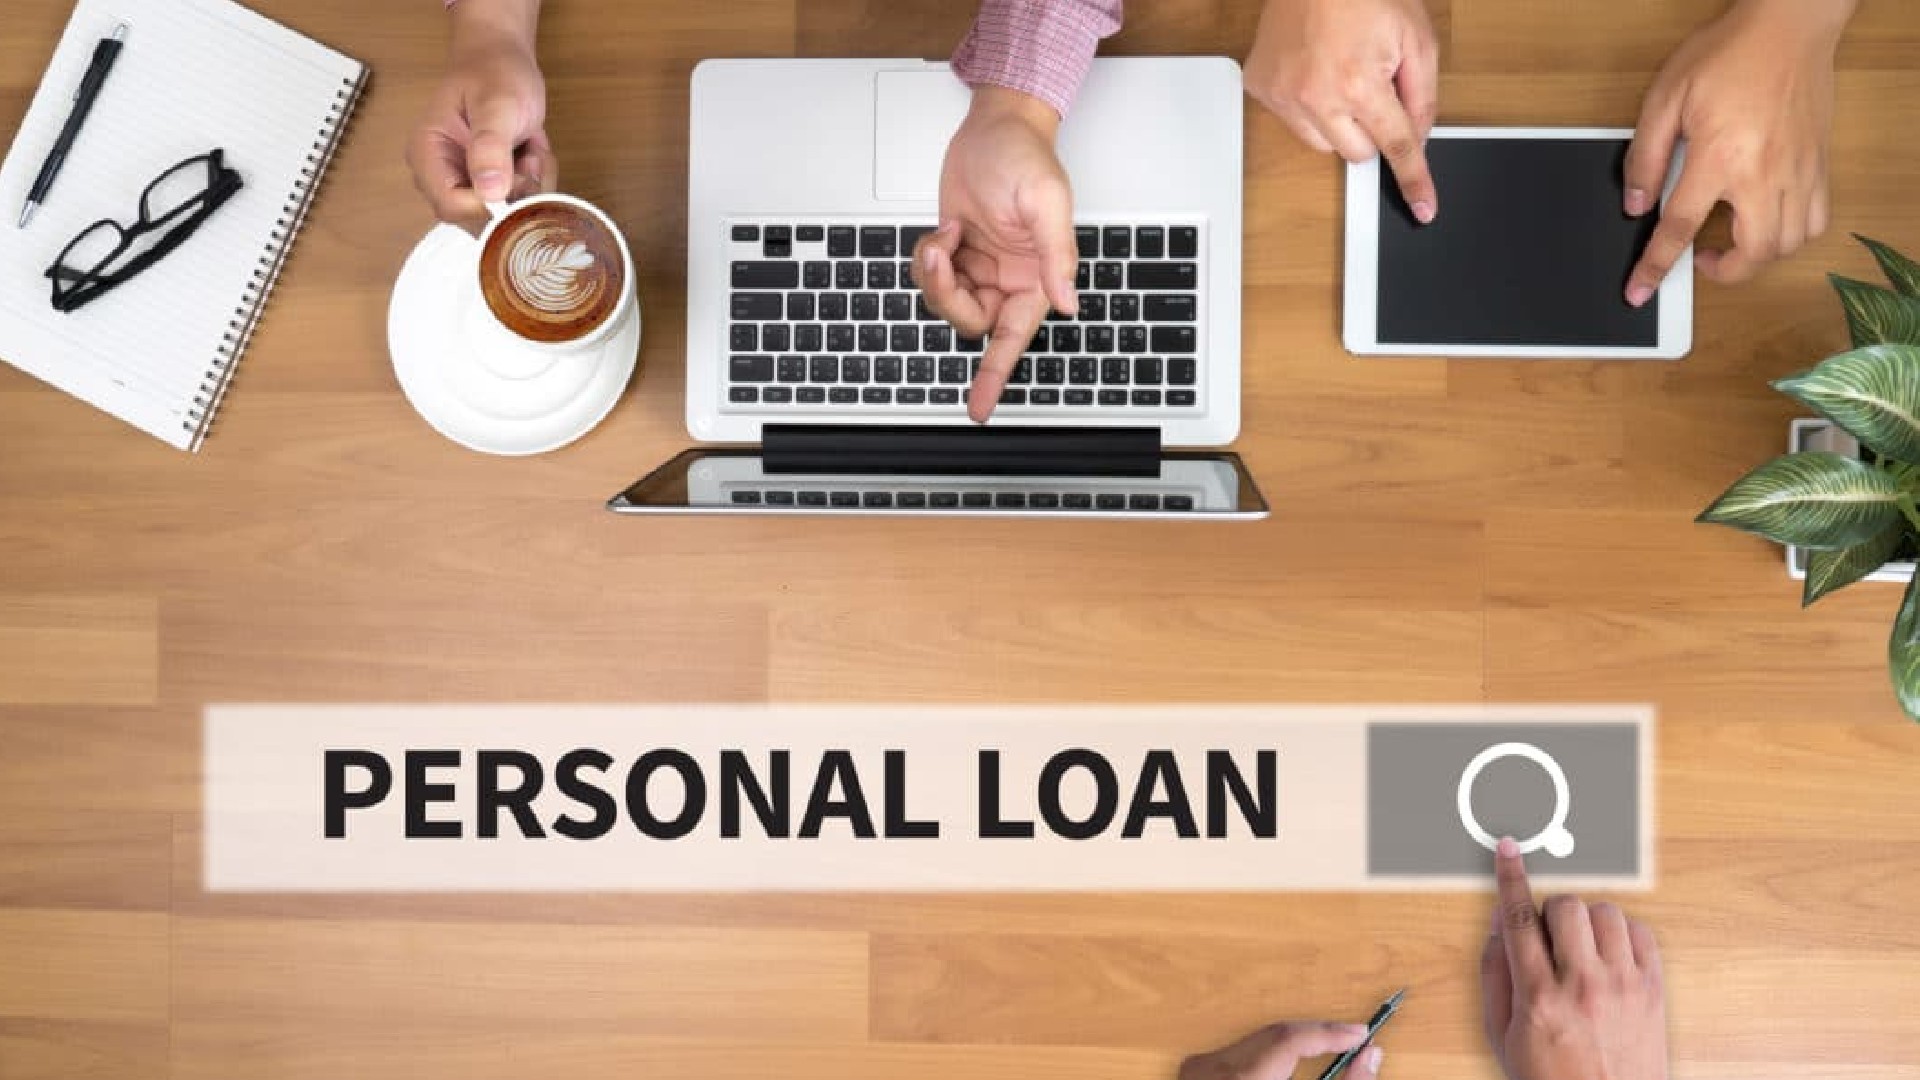 When and how to refinance a personal loan